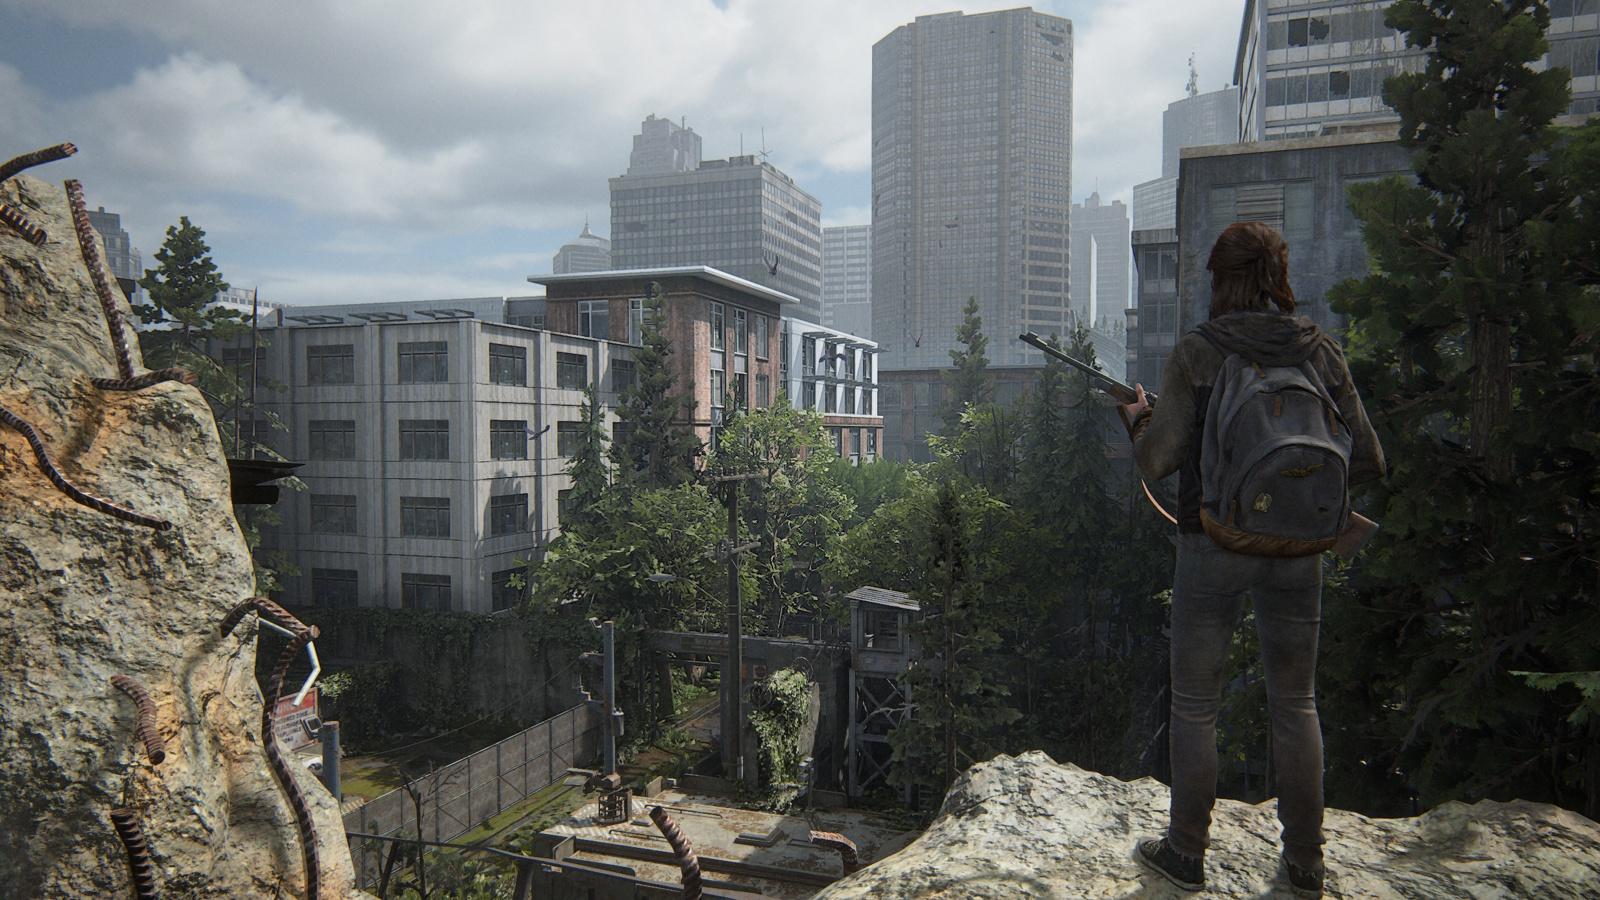 The Last of Us Multiplayer Could be Coming to PS4, Job Listing Suggests -  Insider Gaming